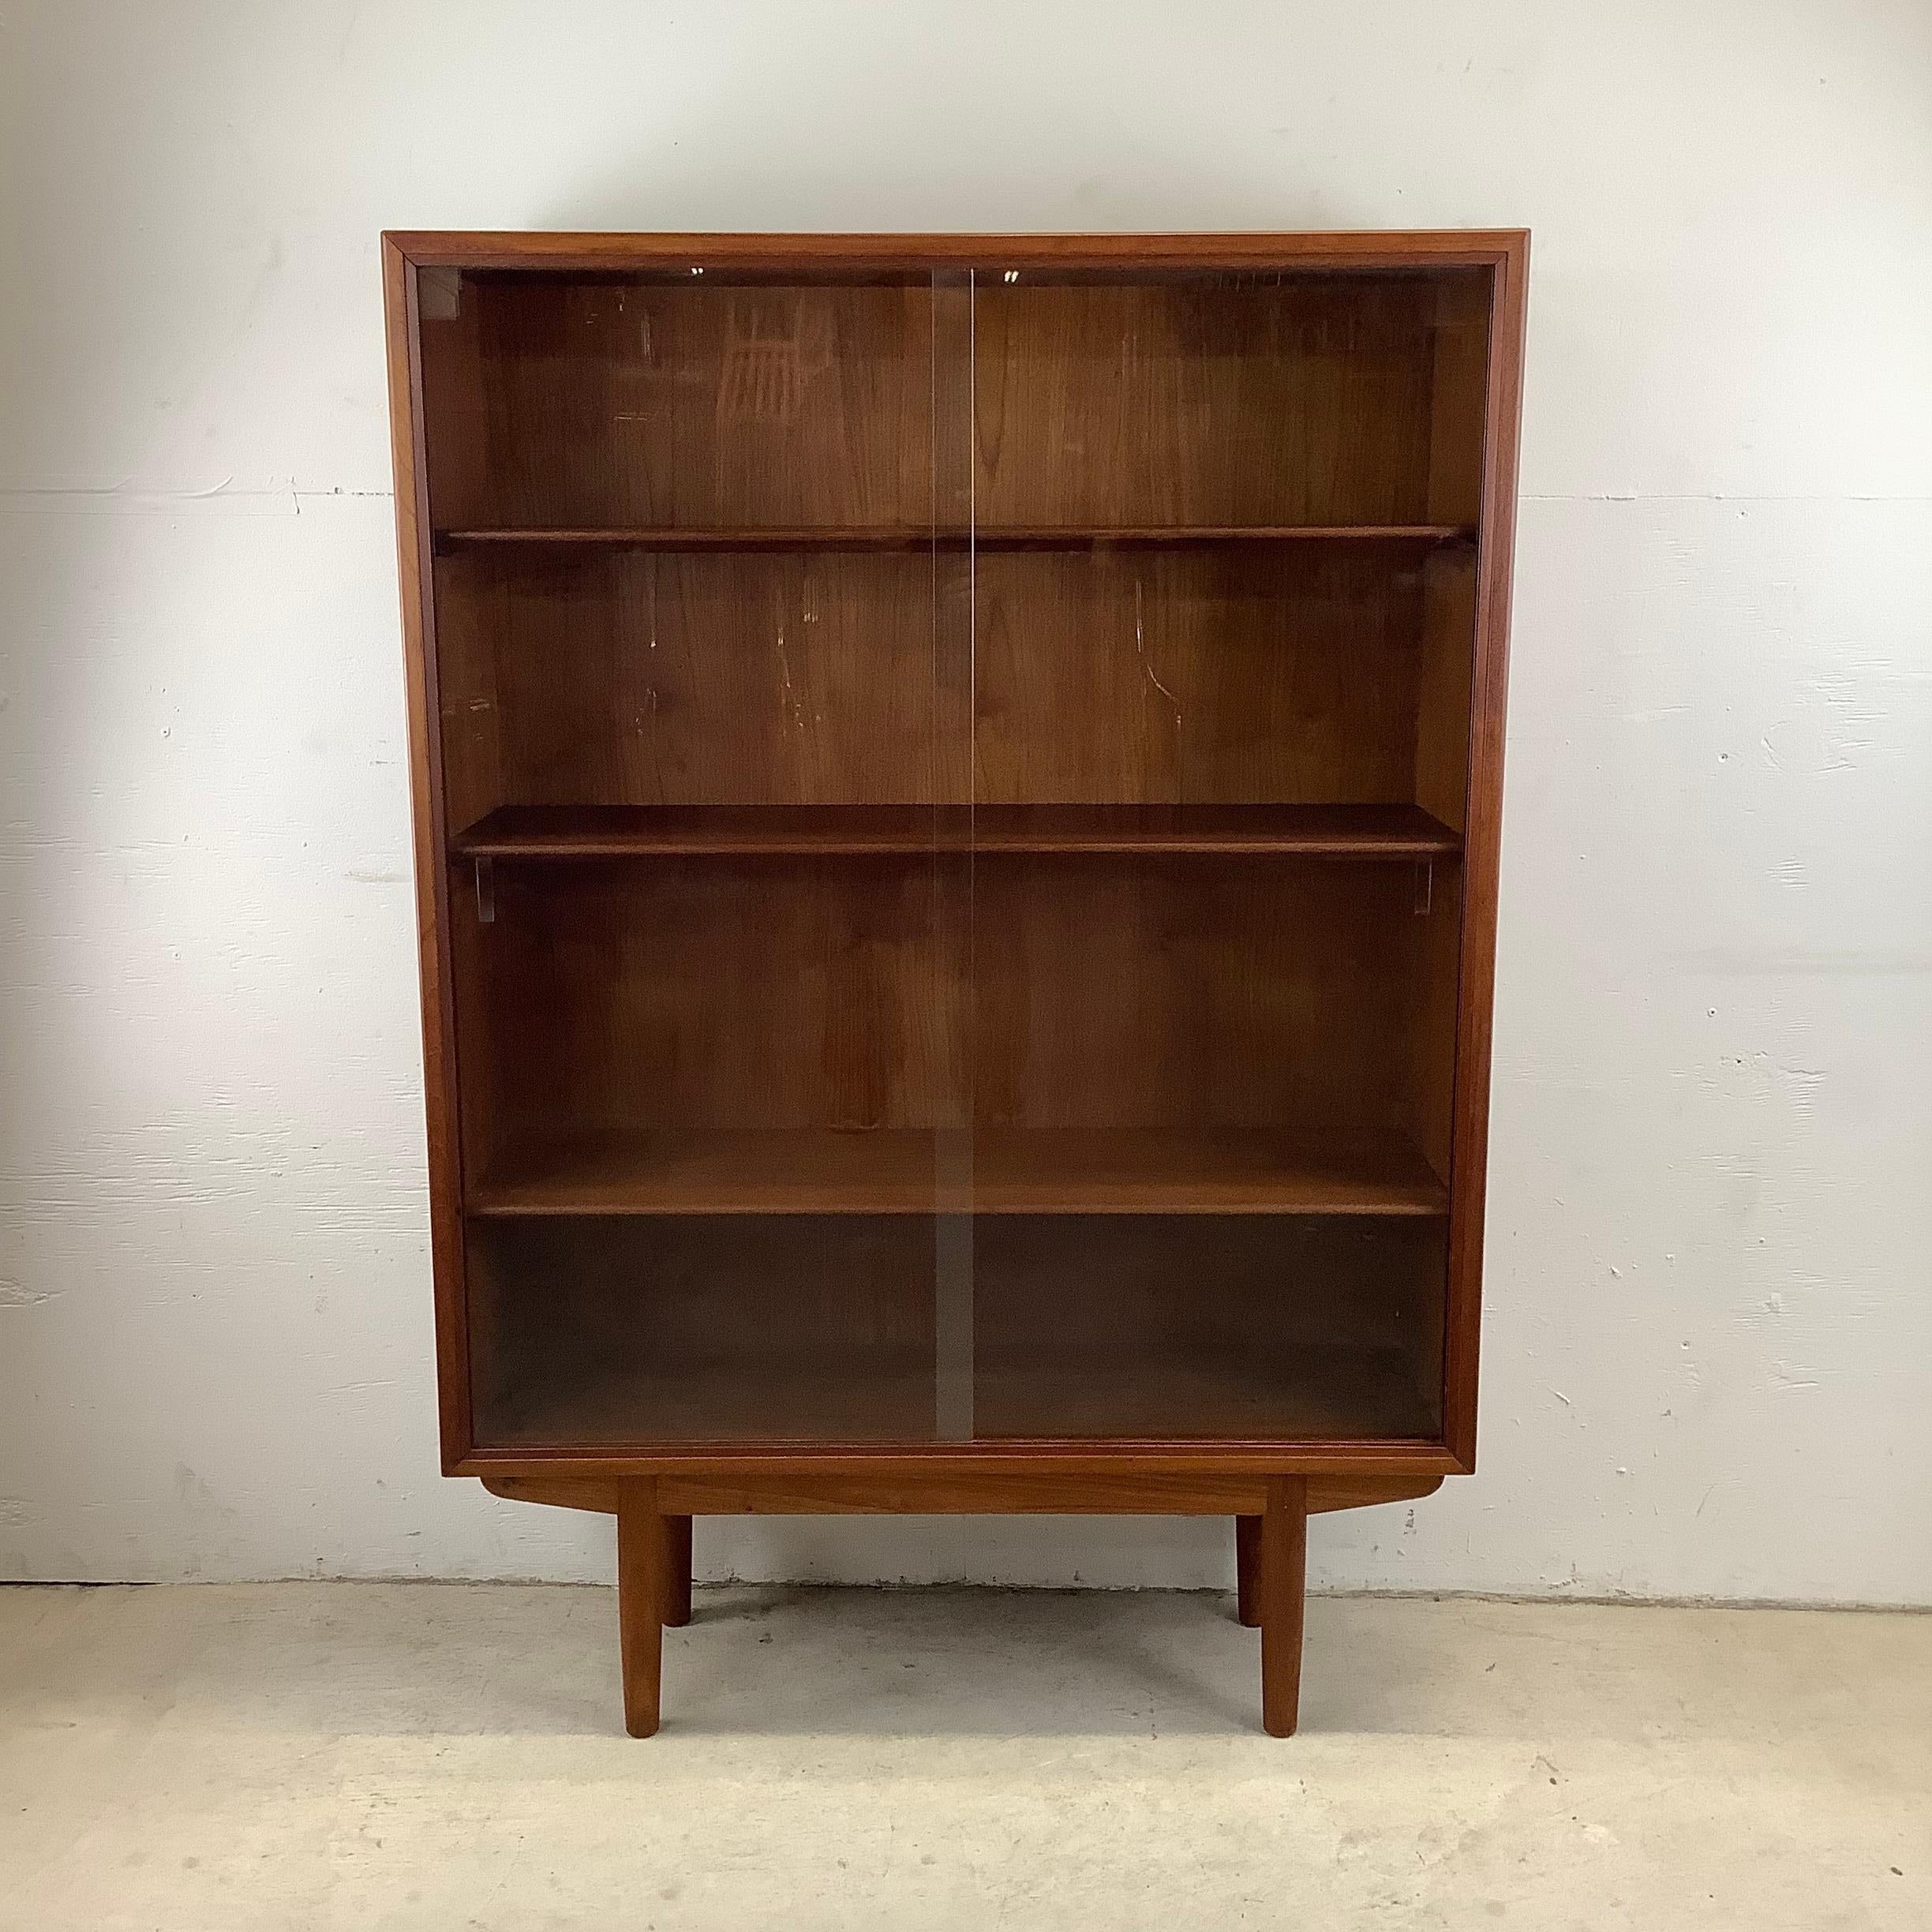 Experience the timeless elegance of Scandinavian Modern design with this exquisite Danish Modern Bookcase, a true homage to Borge Mogensen's vision. Crafted in the 1960s by the esteemed Søborg Møbelfabrik, this teak masterpiece embodies the